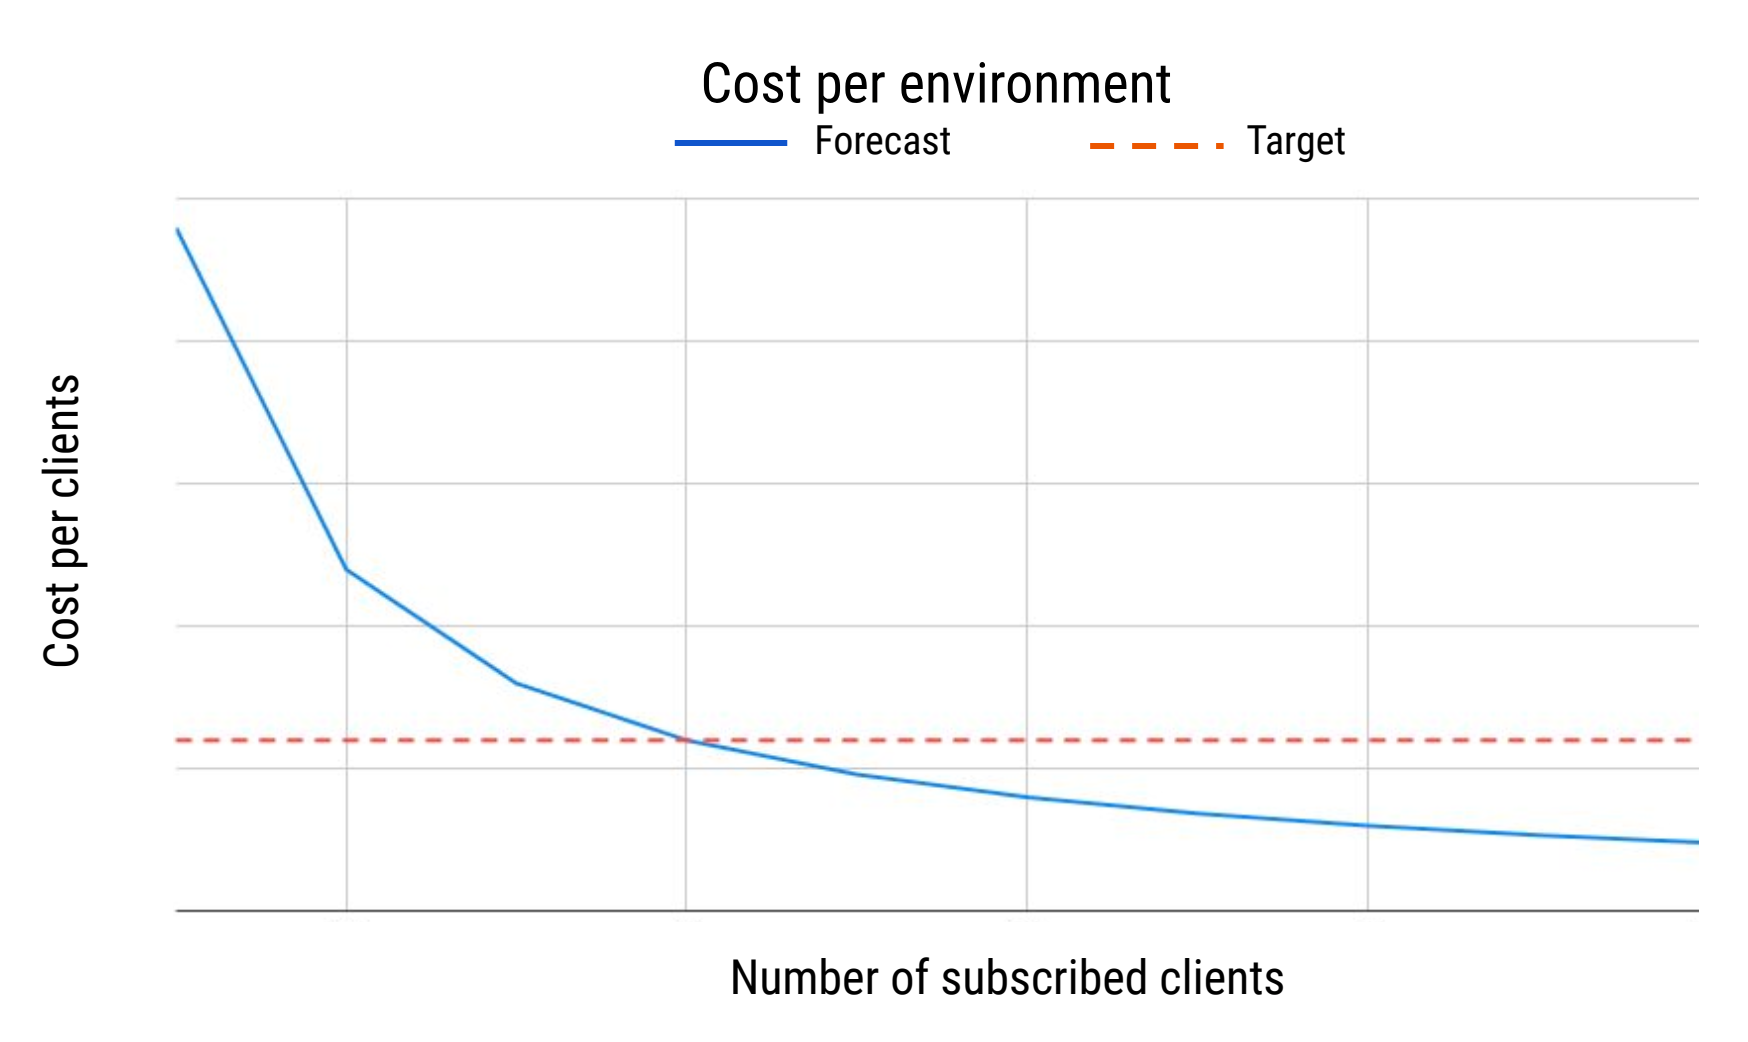 Chart displaying the forecast cost model for environments per number of subscribed clients